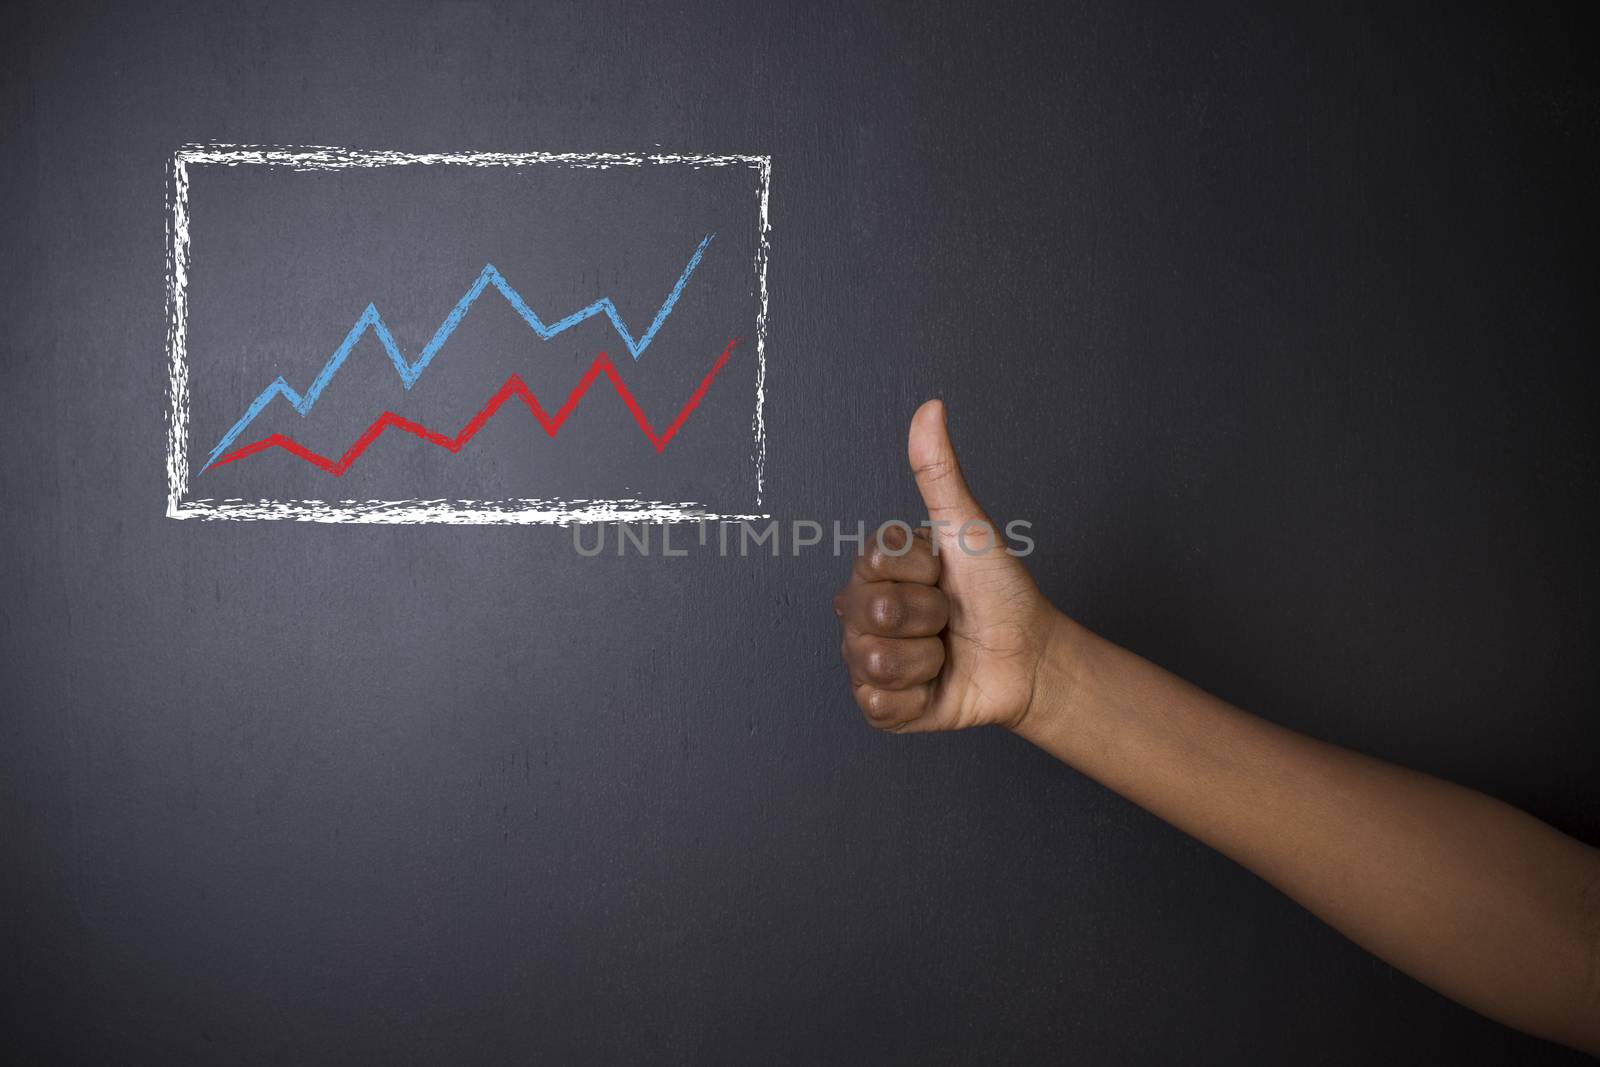 South African or African American woman teacher or student thumbs up against blackboard background with chalk growth line graph